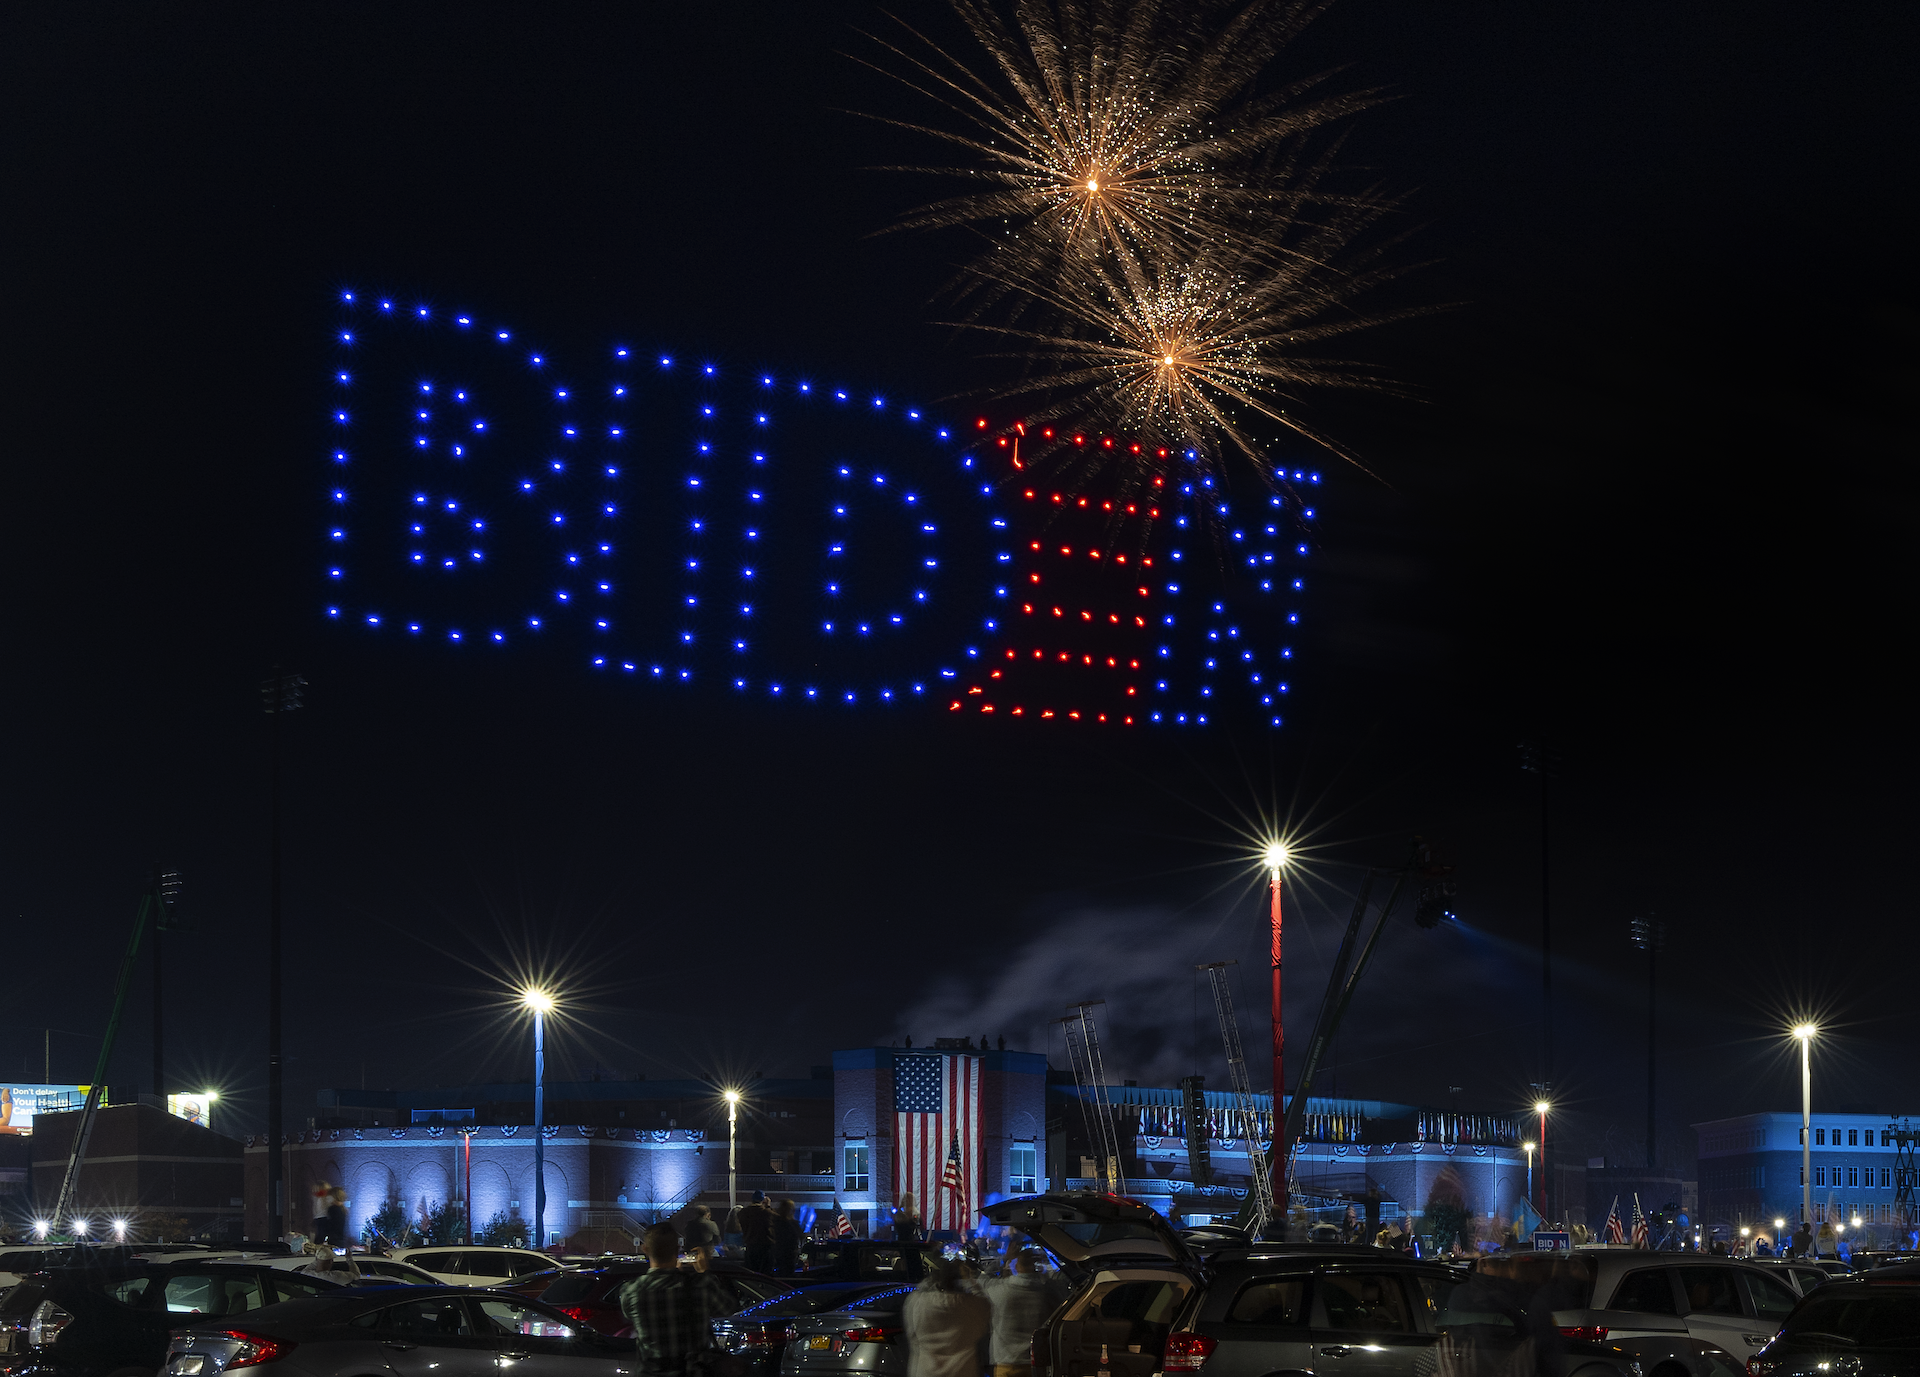 Verge Aero and Strictly FX fly a drone light show for President-elect Biden